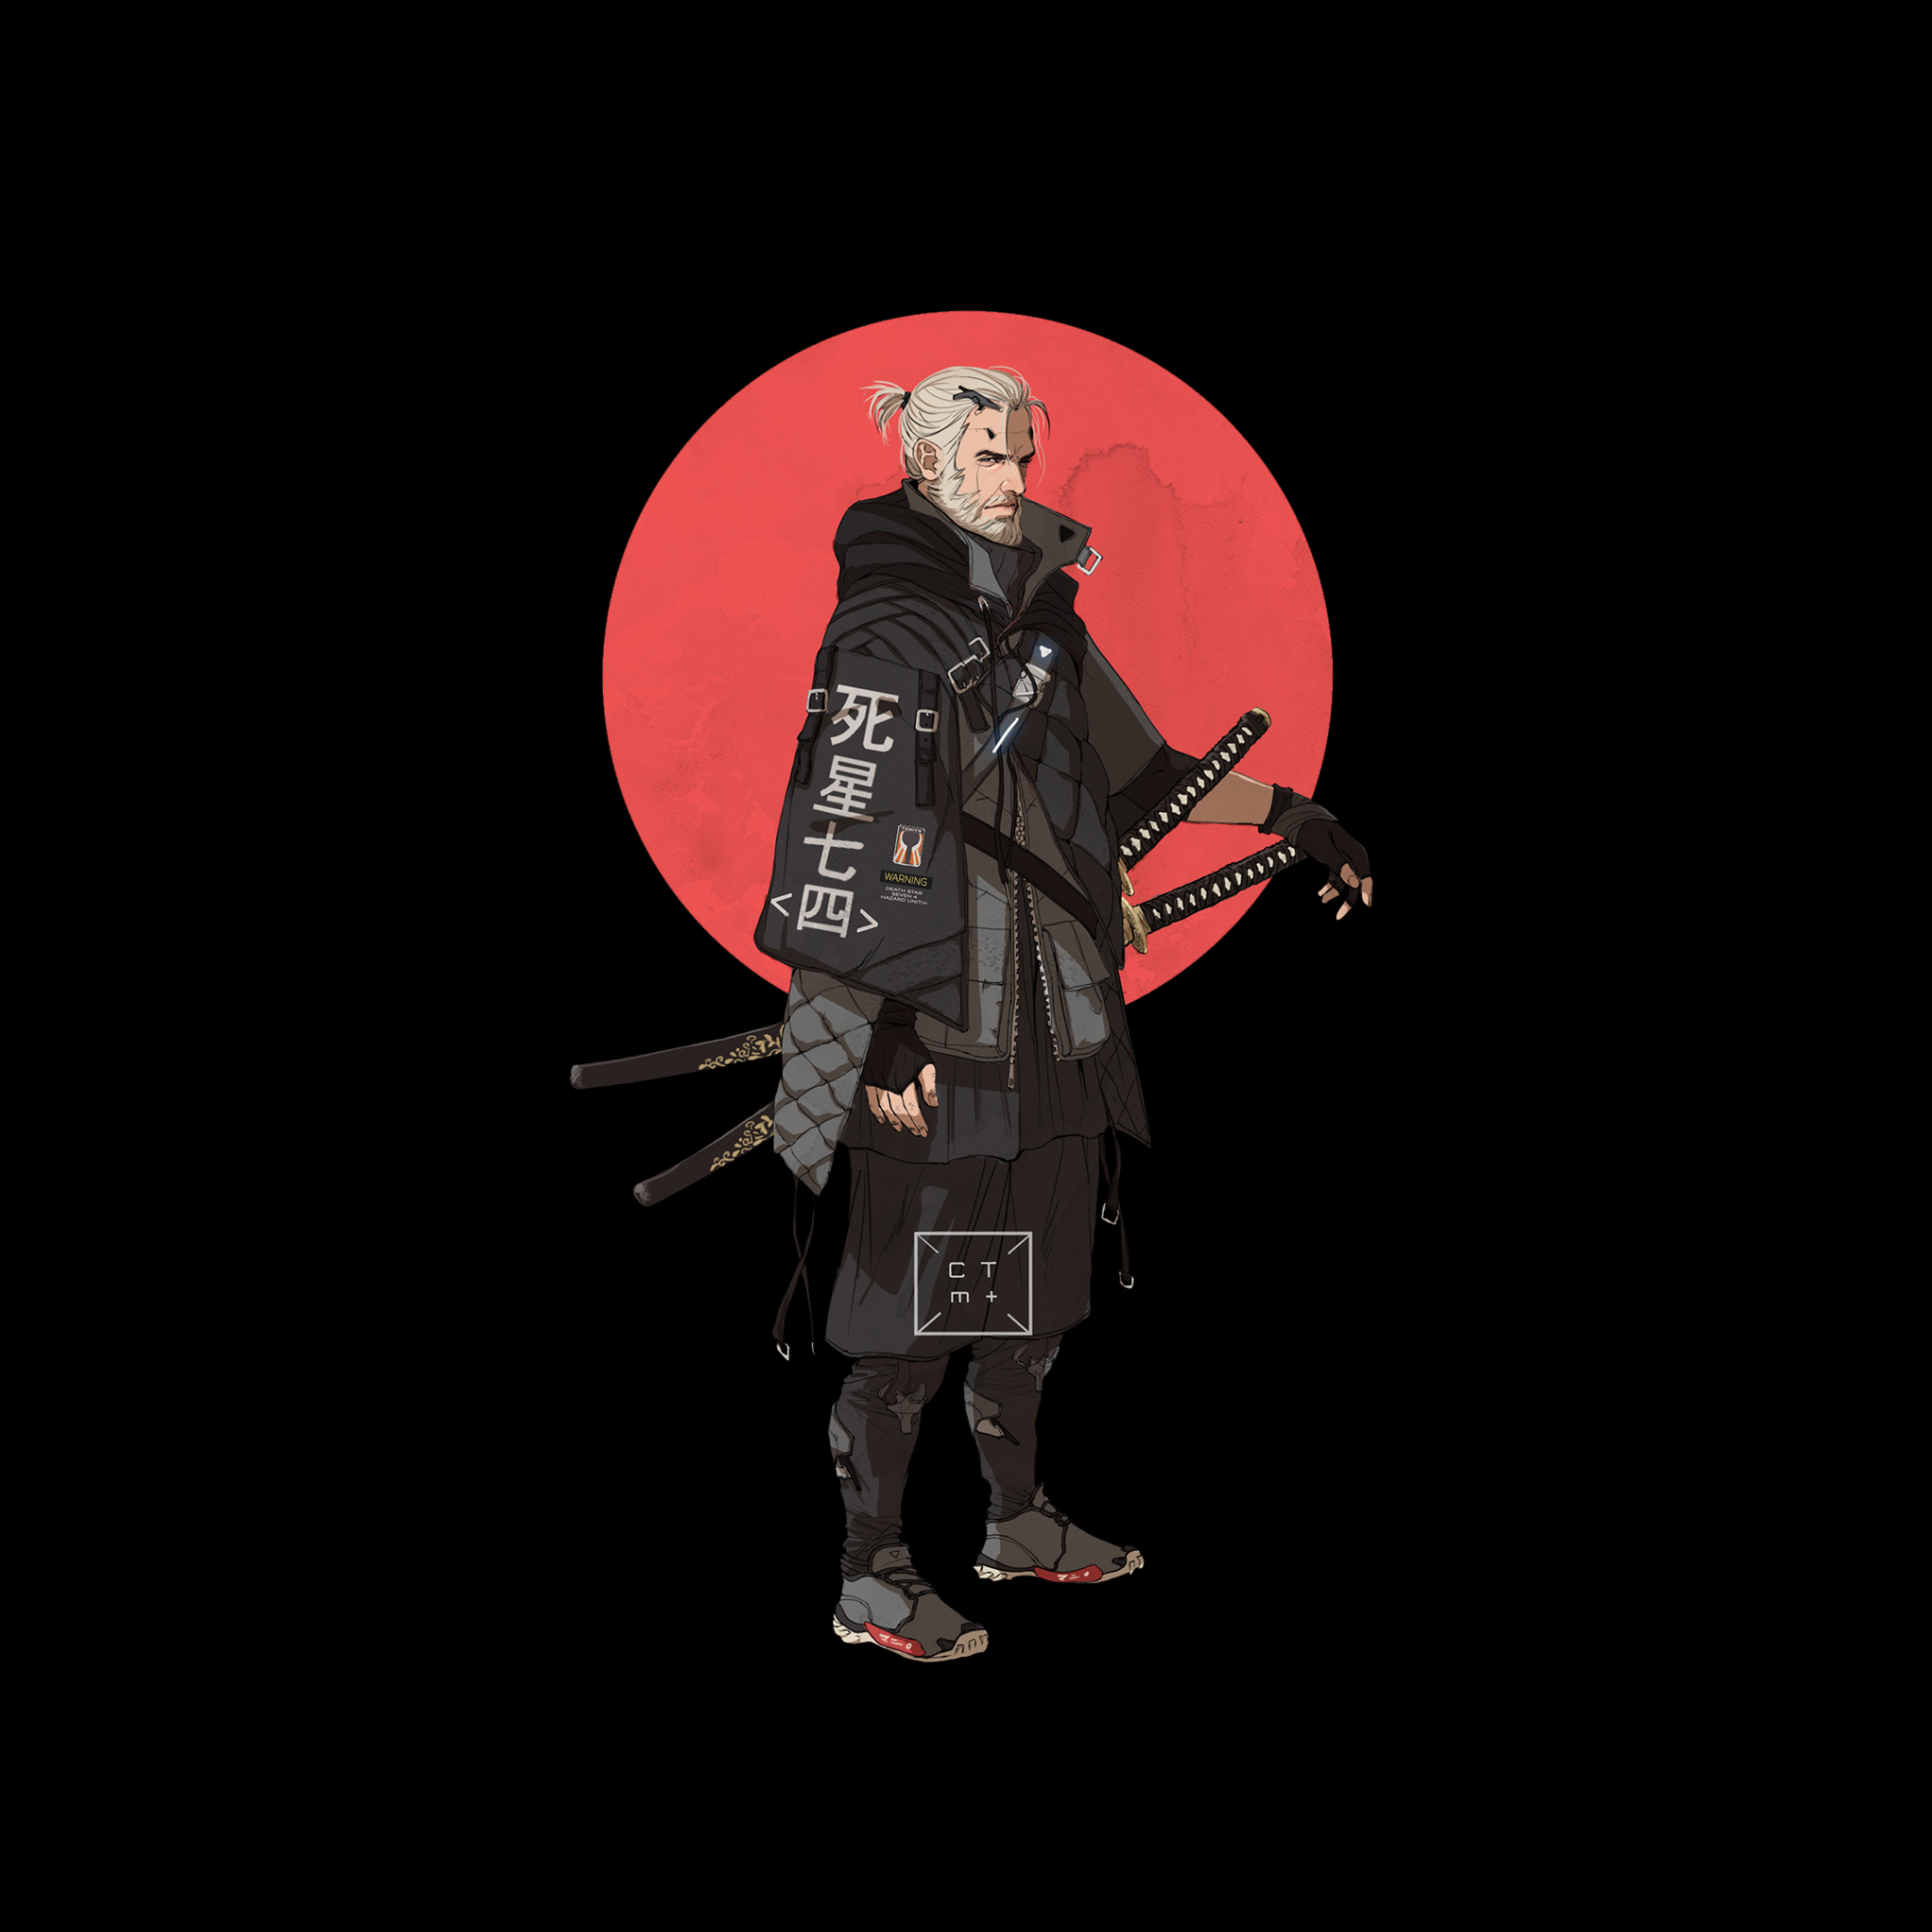 The Witcher Pfp by Manilyn Toledana